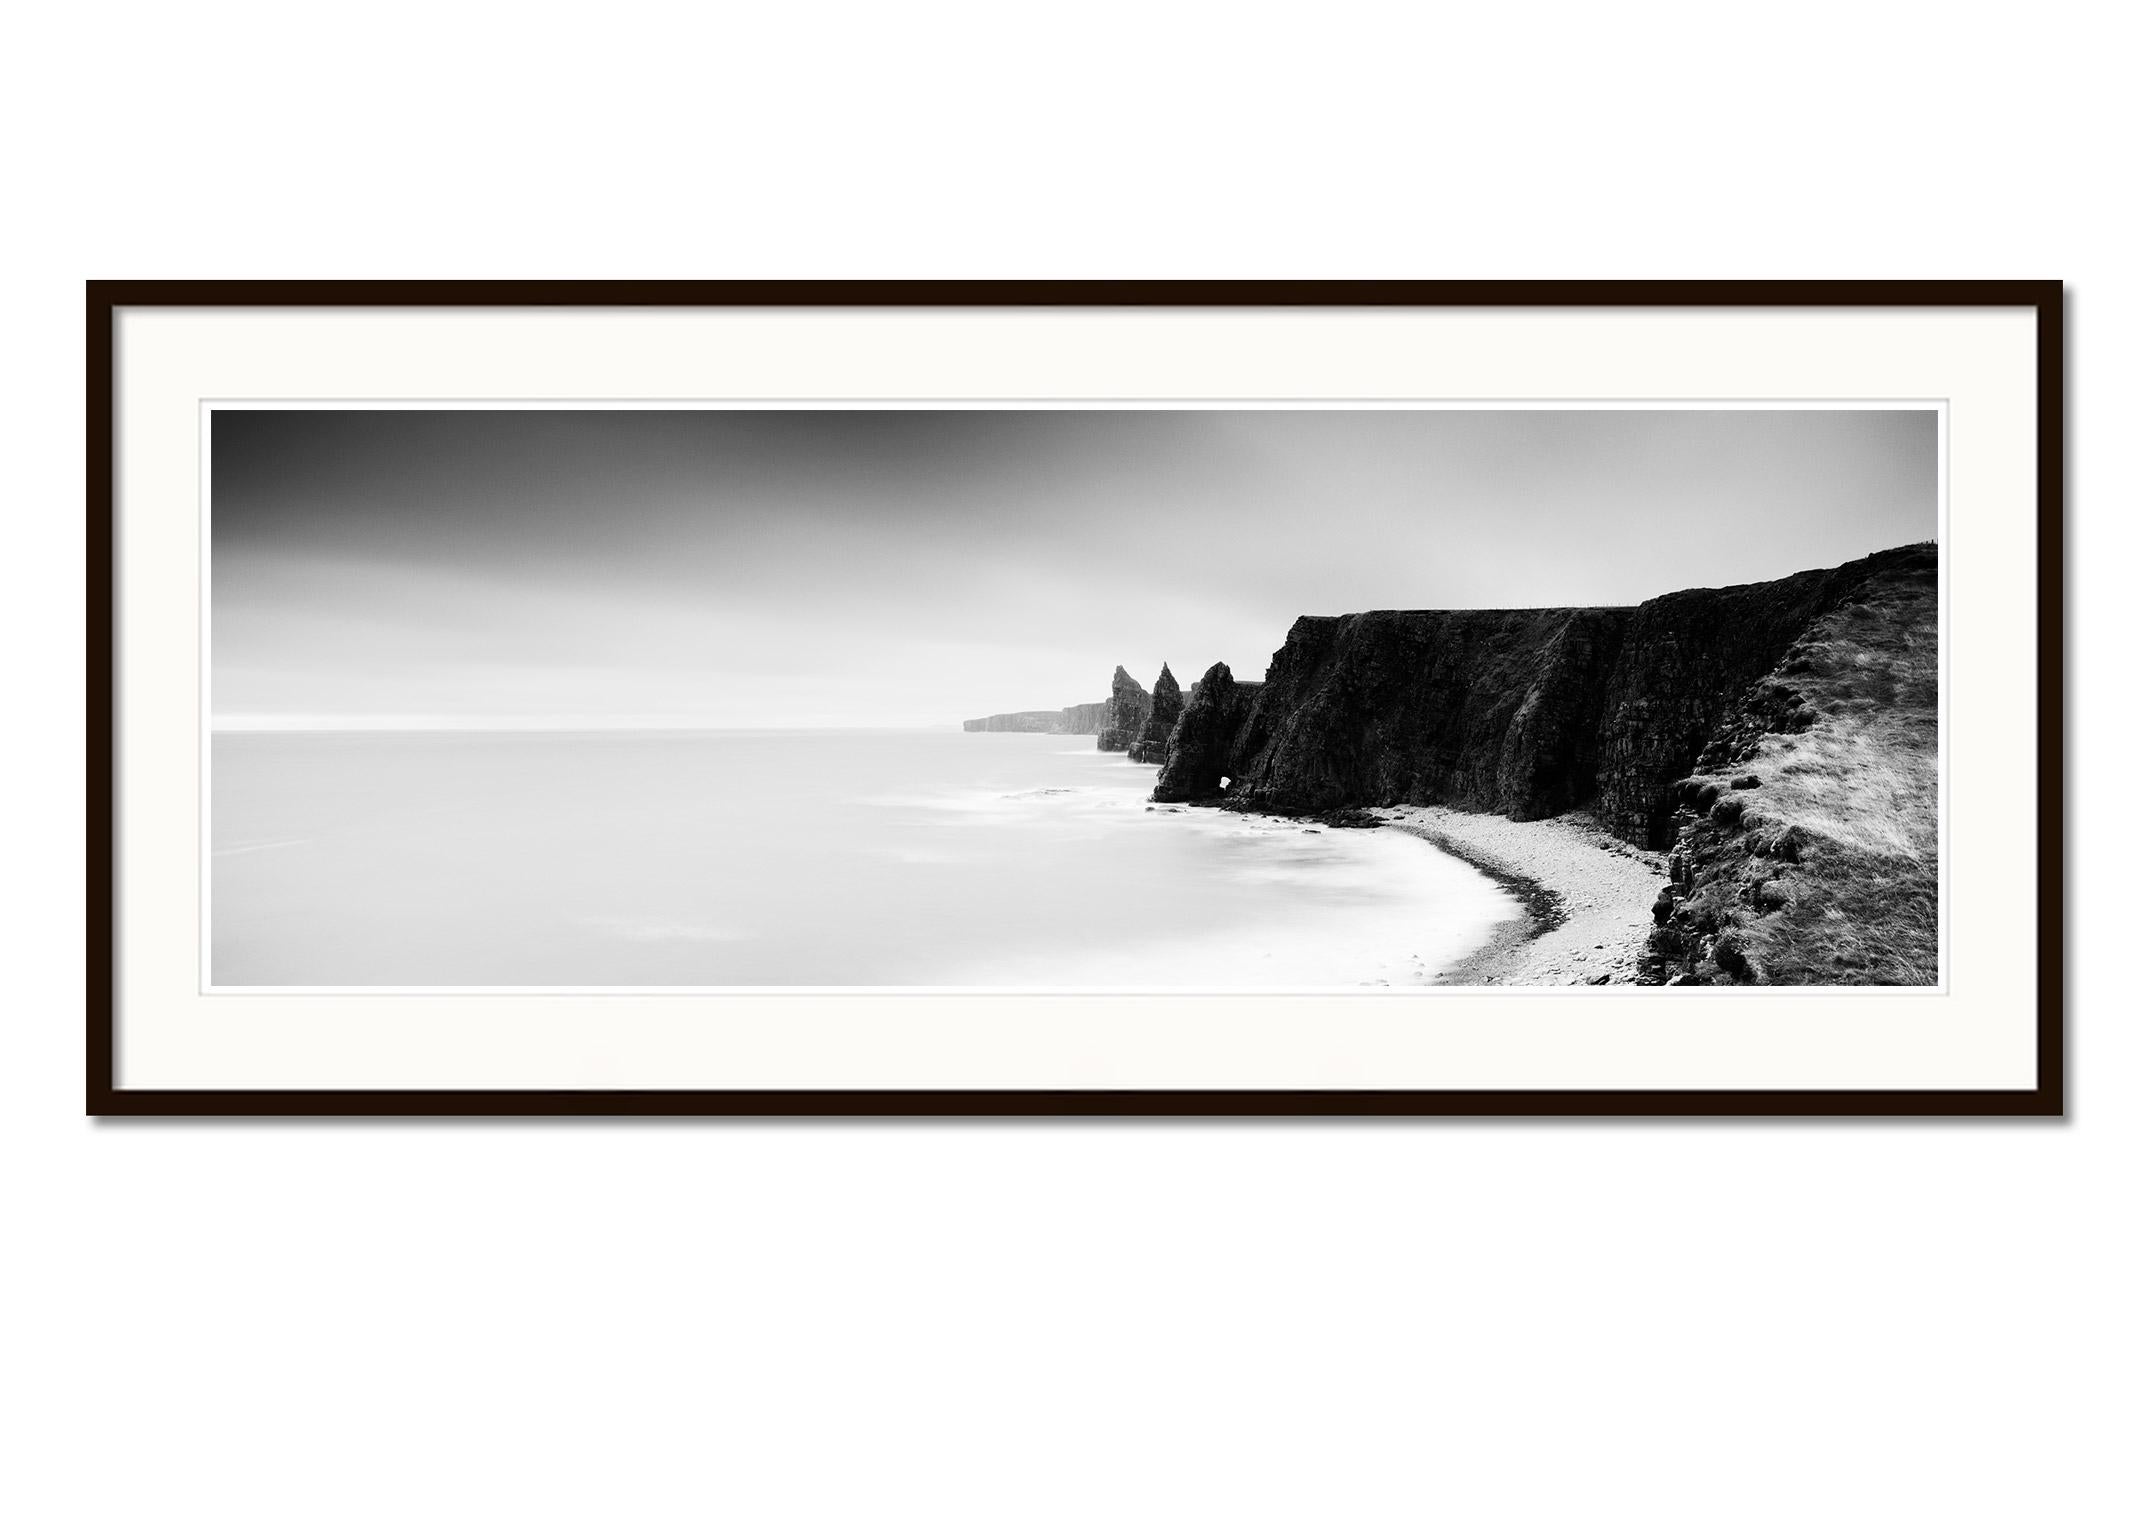 Black and white fine art panorama long exposure waterscape - landscape photography. The Duncansby Stacks are just off the coast of Duncansby Head on Scotland's stunning coastline. Archival pigment ink print, edition of 9. Signed, titled, dated and